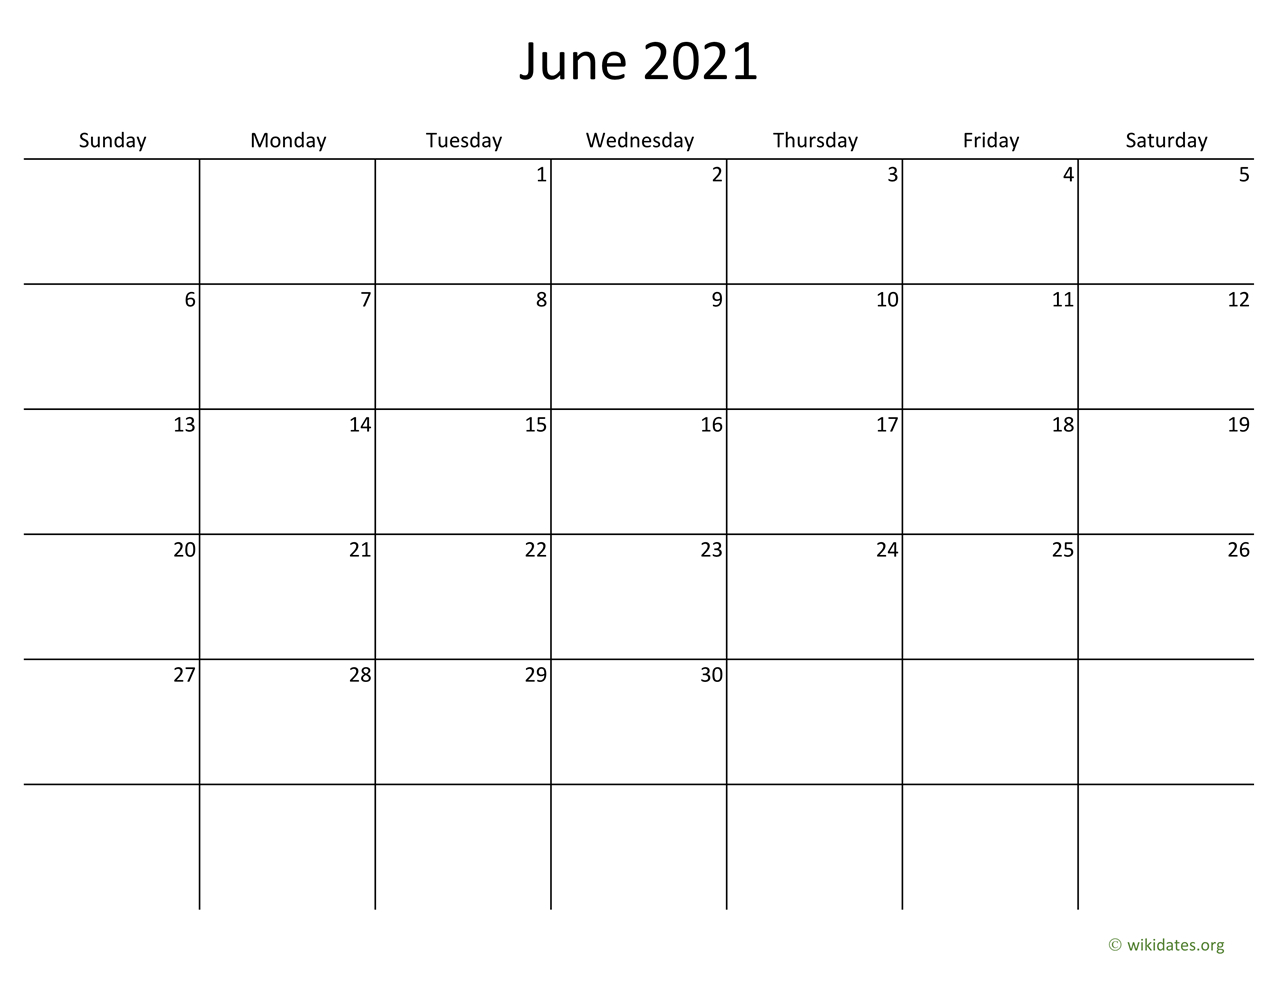 June 2021 Calendar With Bigger Boxes | Wikidates